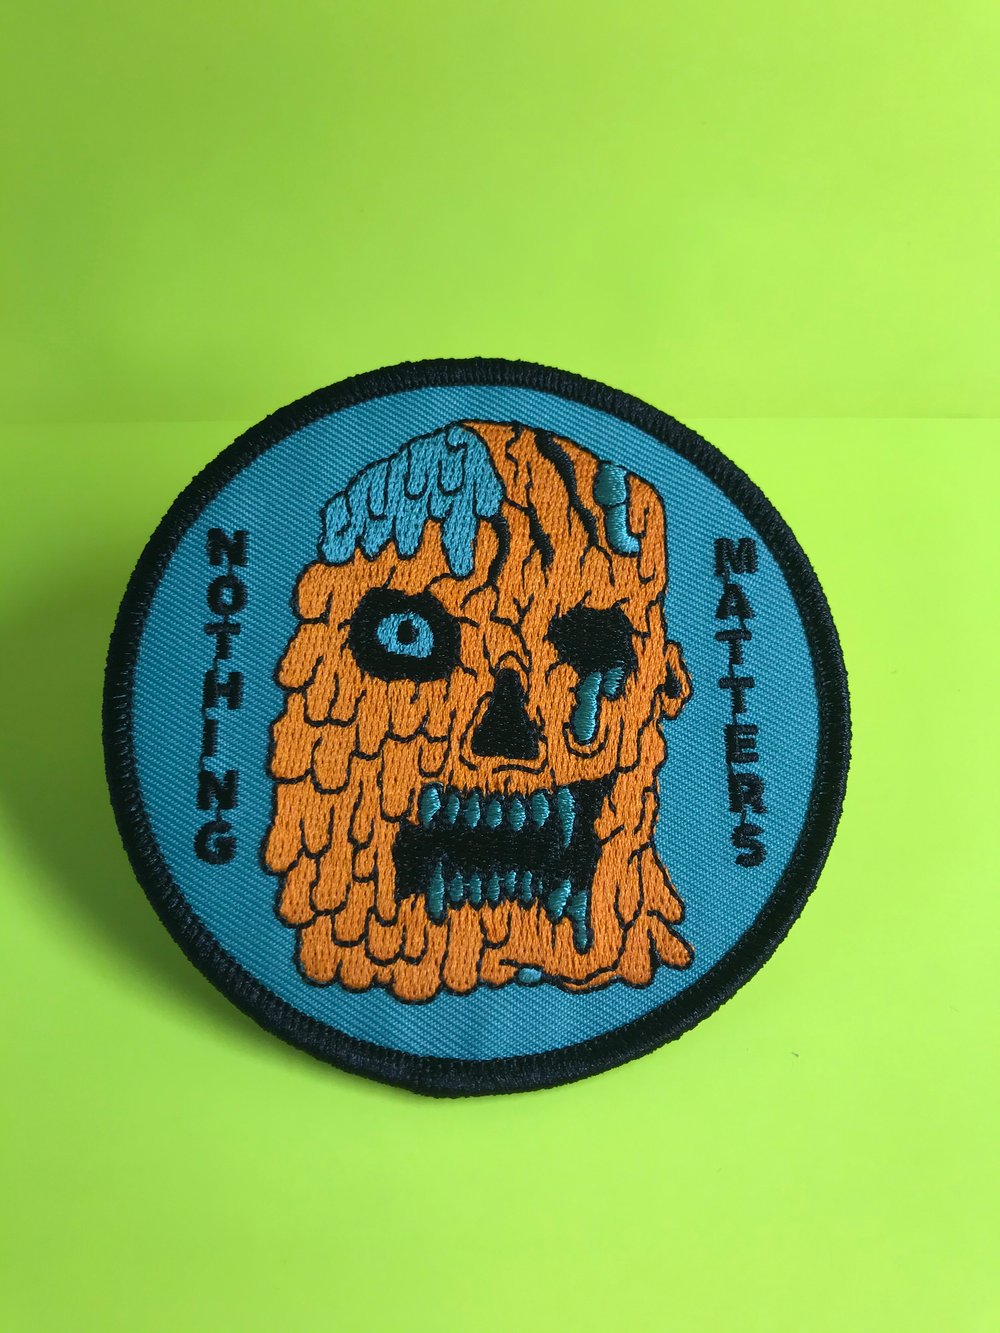 NOTHING MATTERS Embroidered Patch